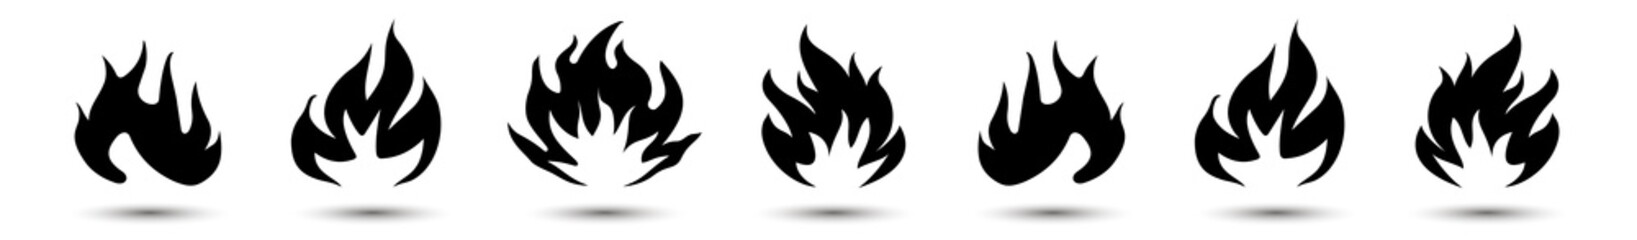 Fire icon vector set isolated on white background. Fire icons exclusive collection .